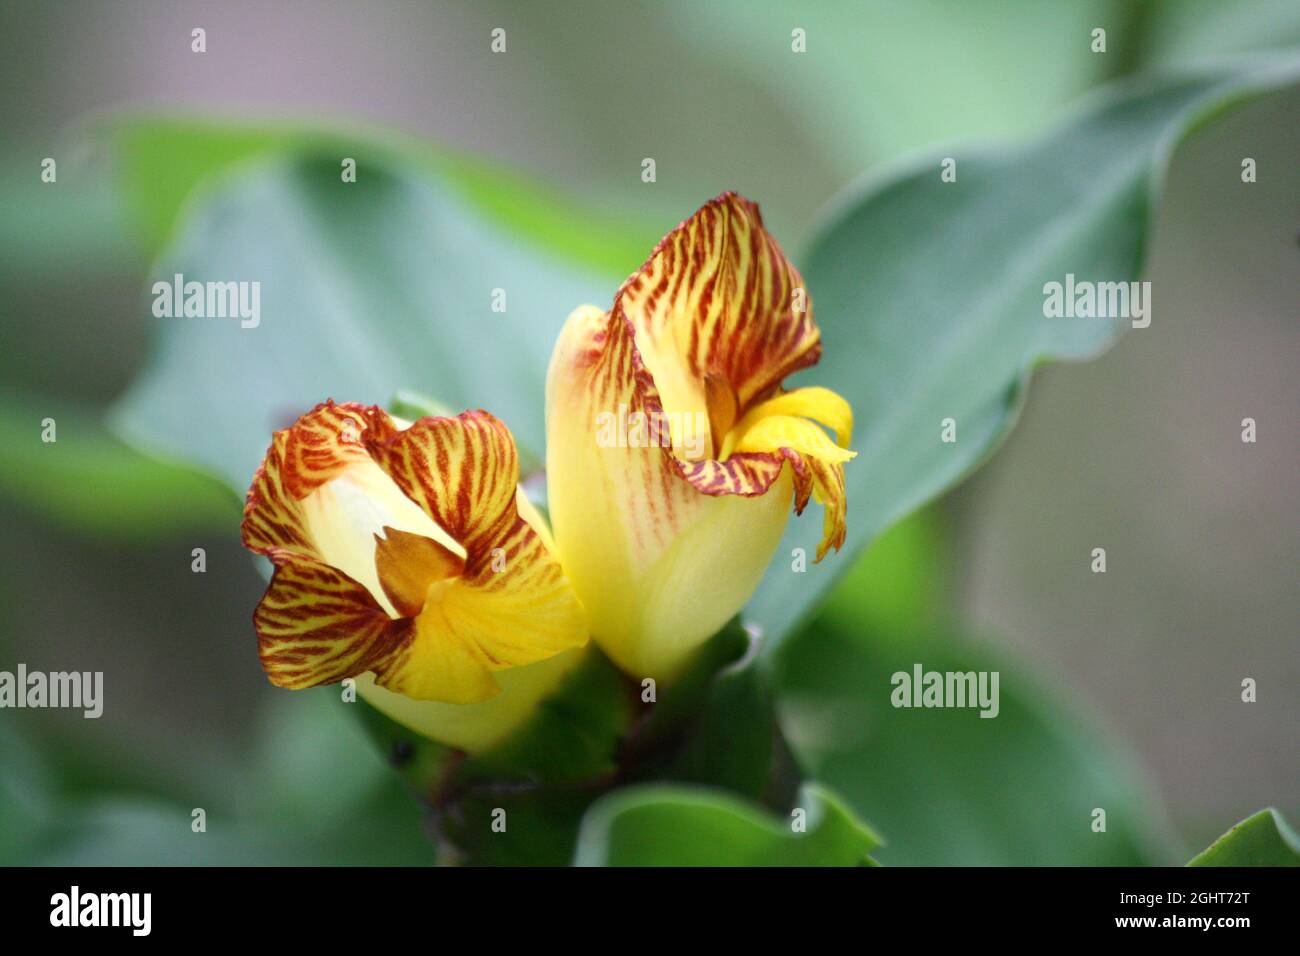 Insulin plant or Costus pictus (Chamaecostus cuspidatus) with pitcher-shaped yellow flowers Stock Photo